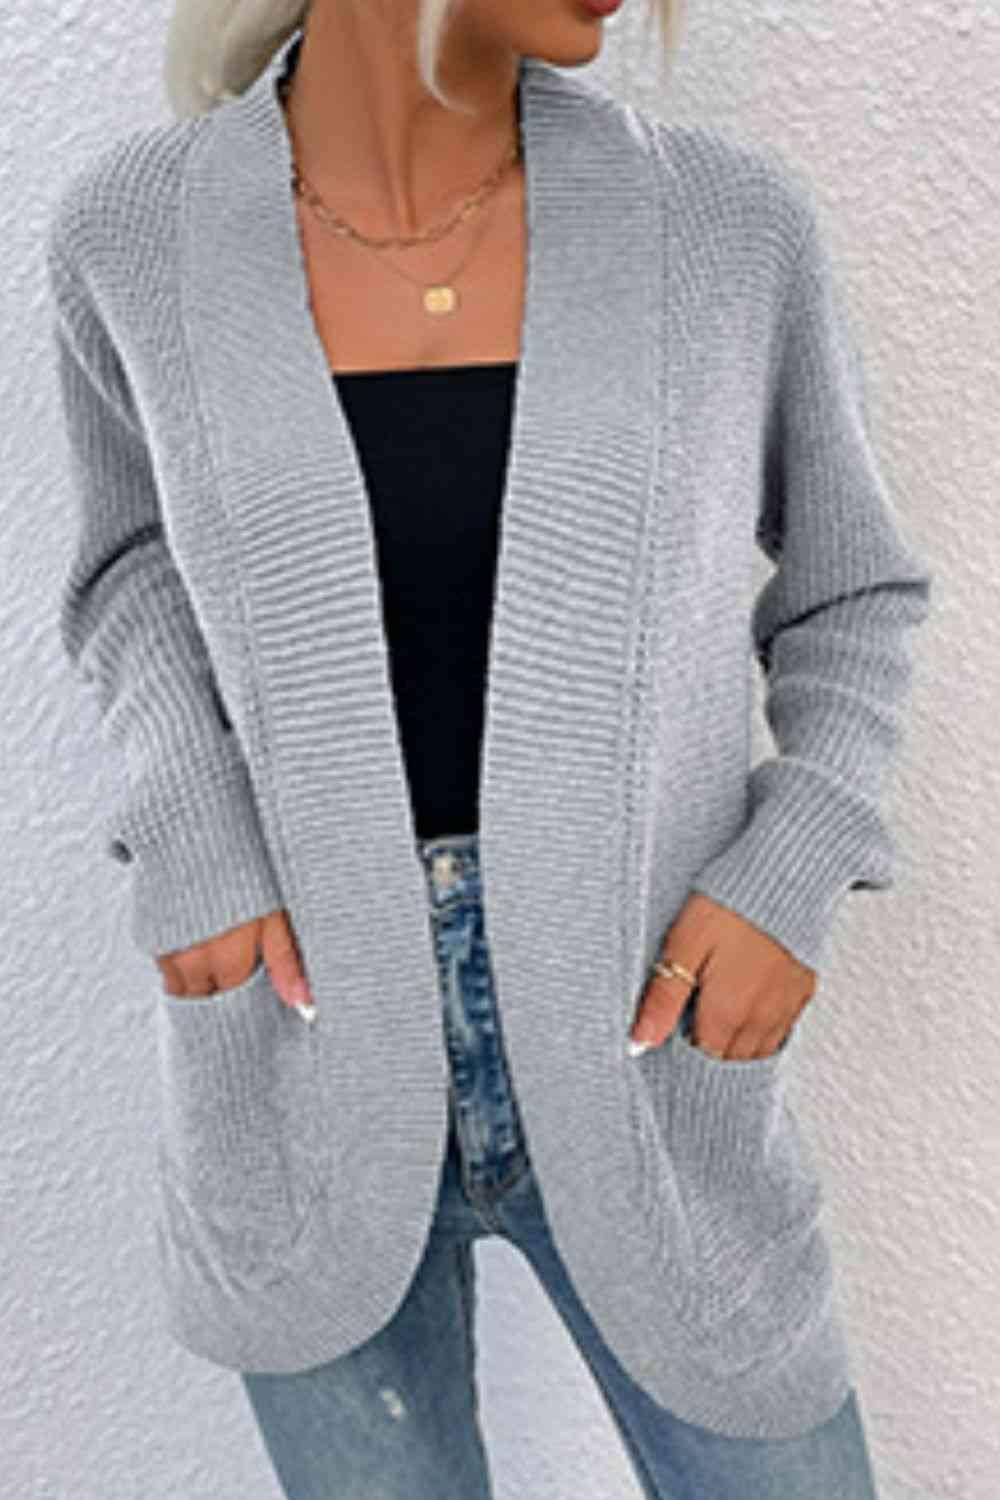 a woman wearing a gray cardigan sweater and jeans